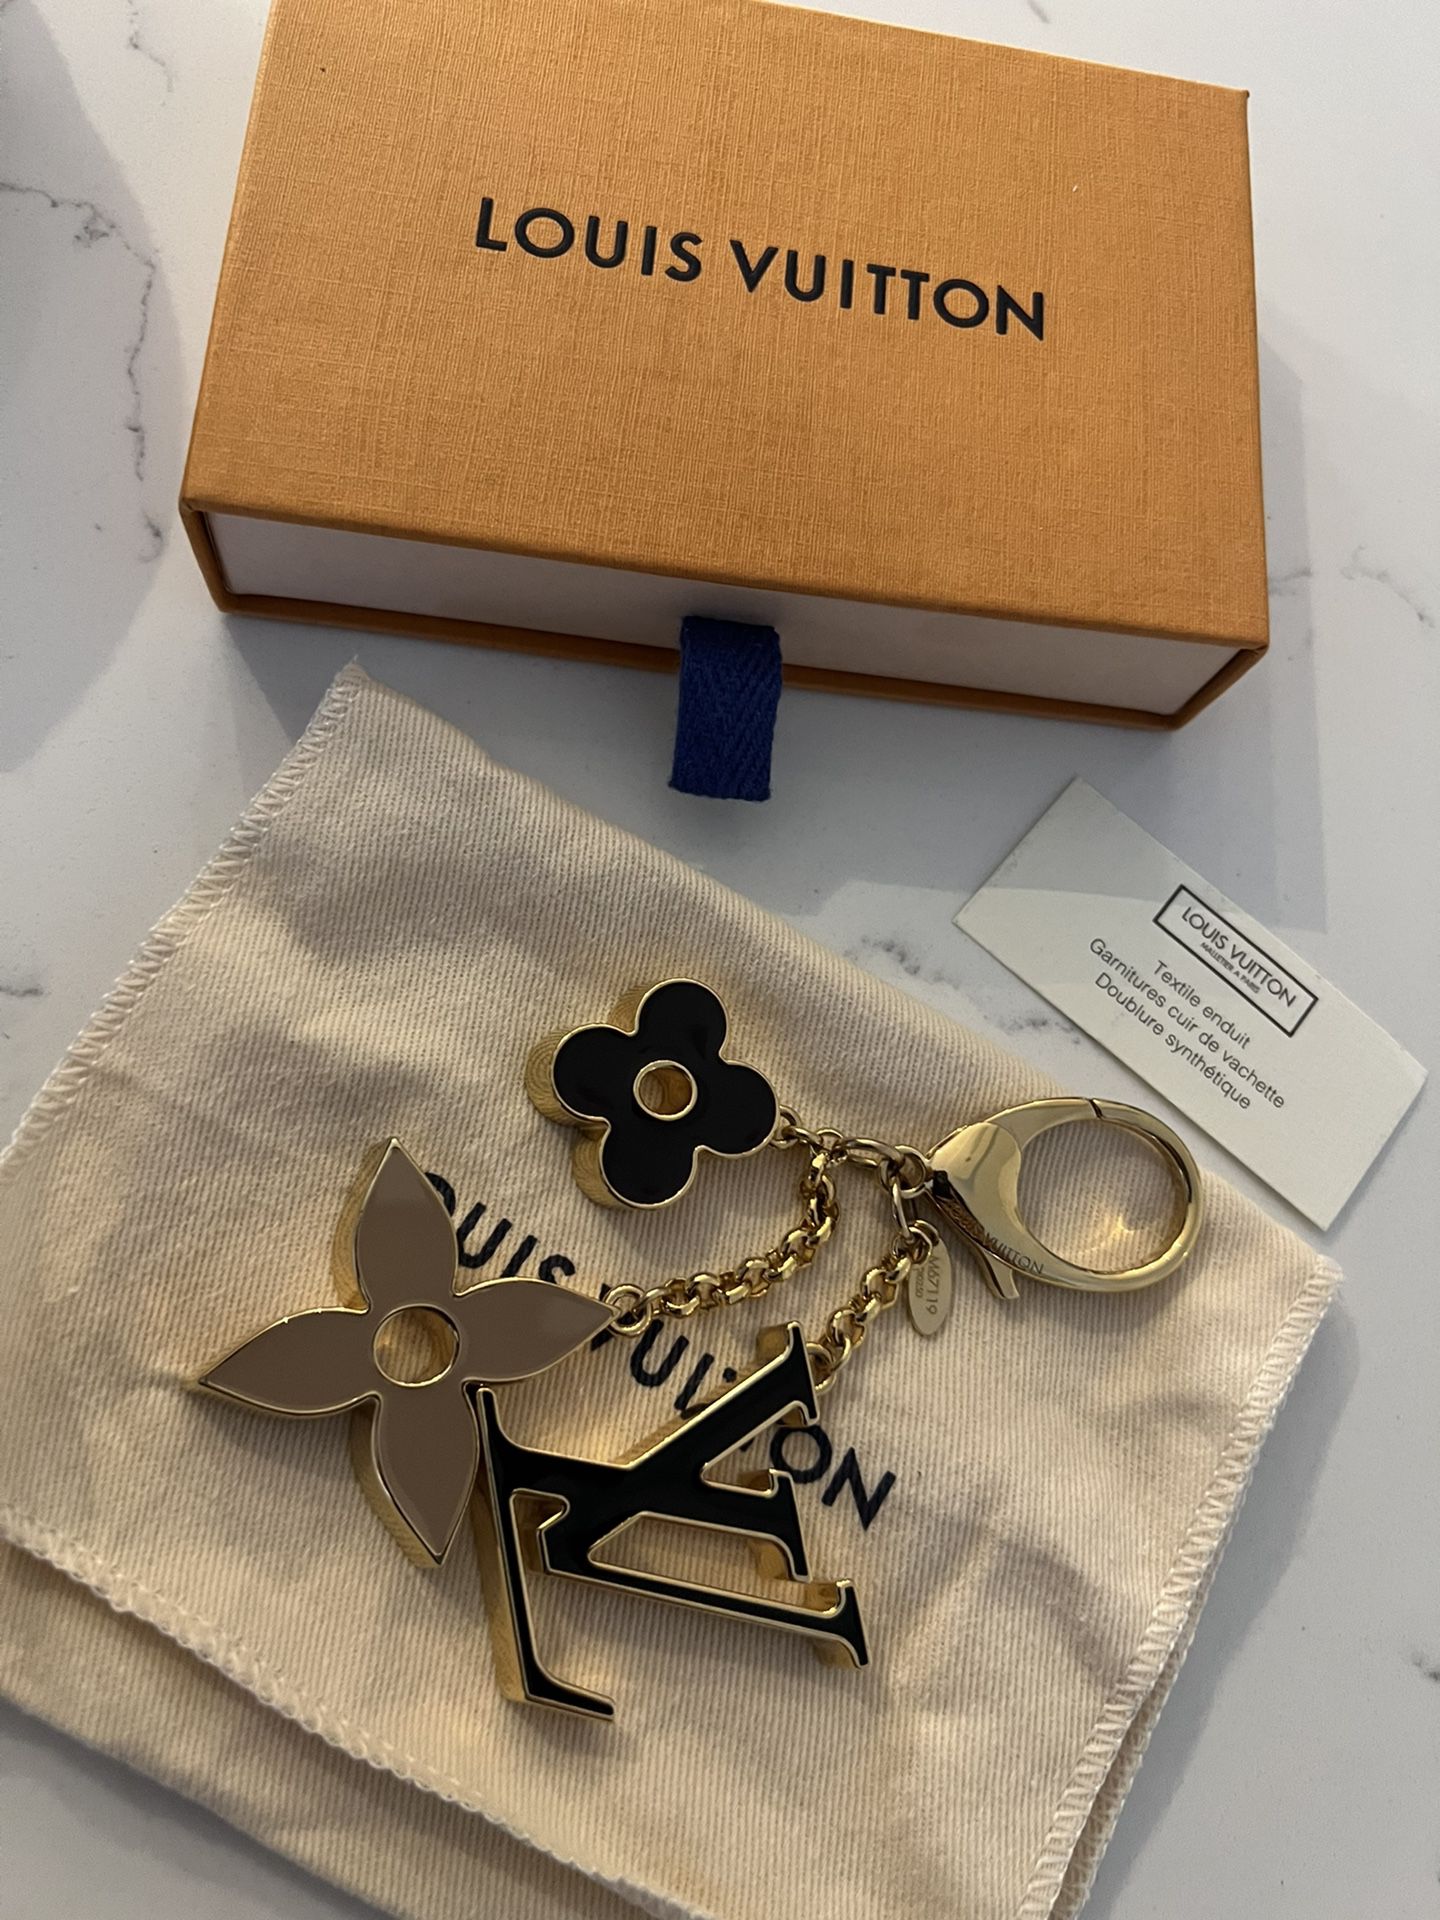 RARE LOUIS VUITTON, Limited Edition MONOGRAM Tassel, Bag Charm, Key Chain  for Sale in Longwood, FL - OfferUp